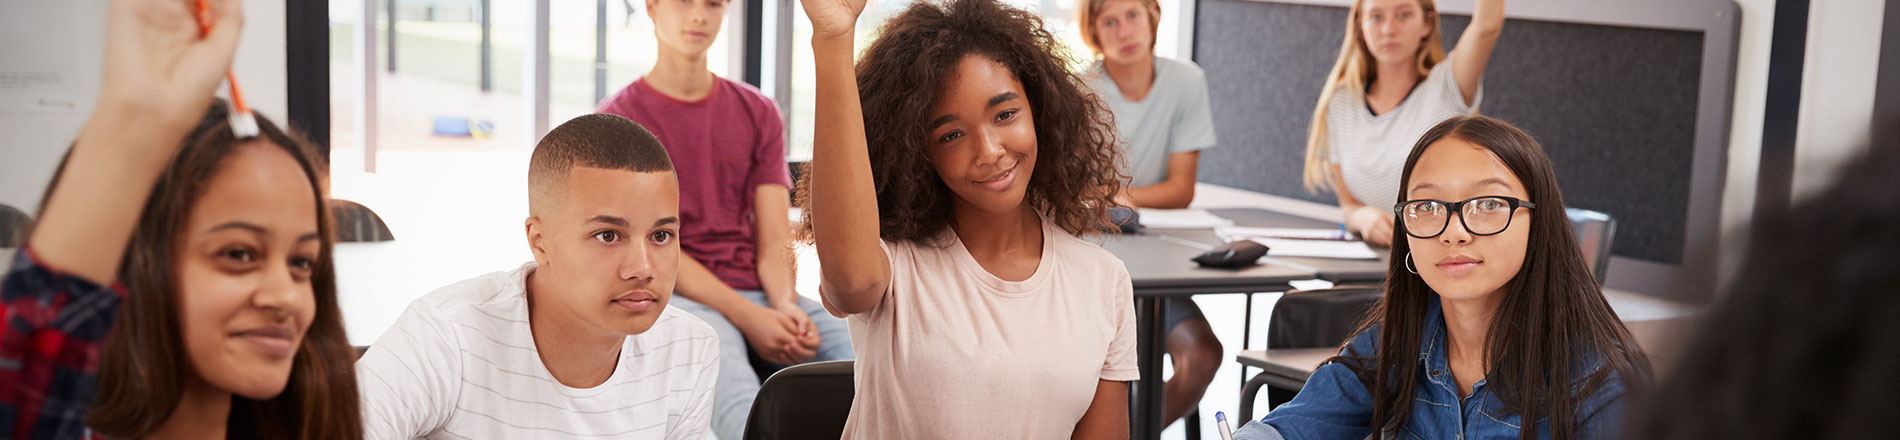 A young person holding their hand in the air in a classroom